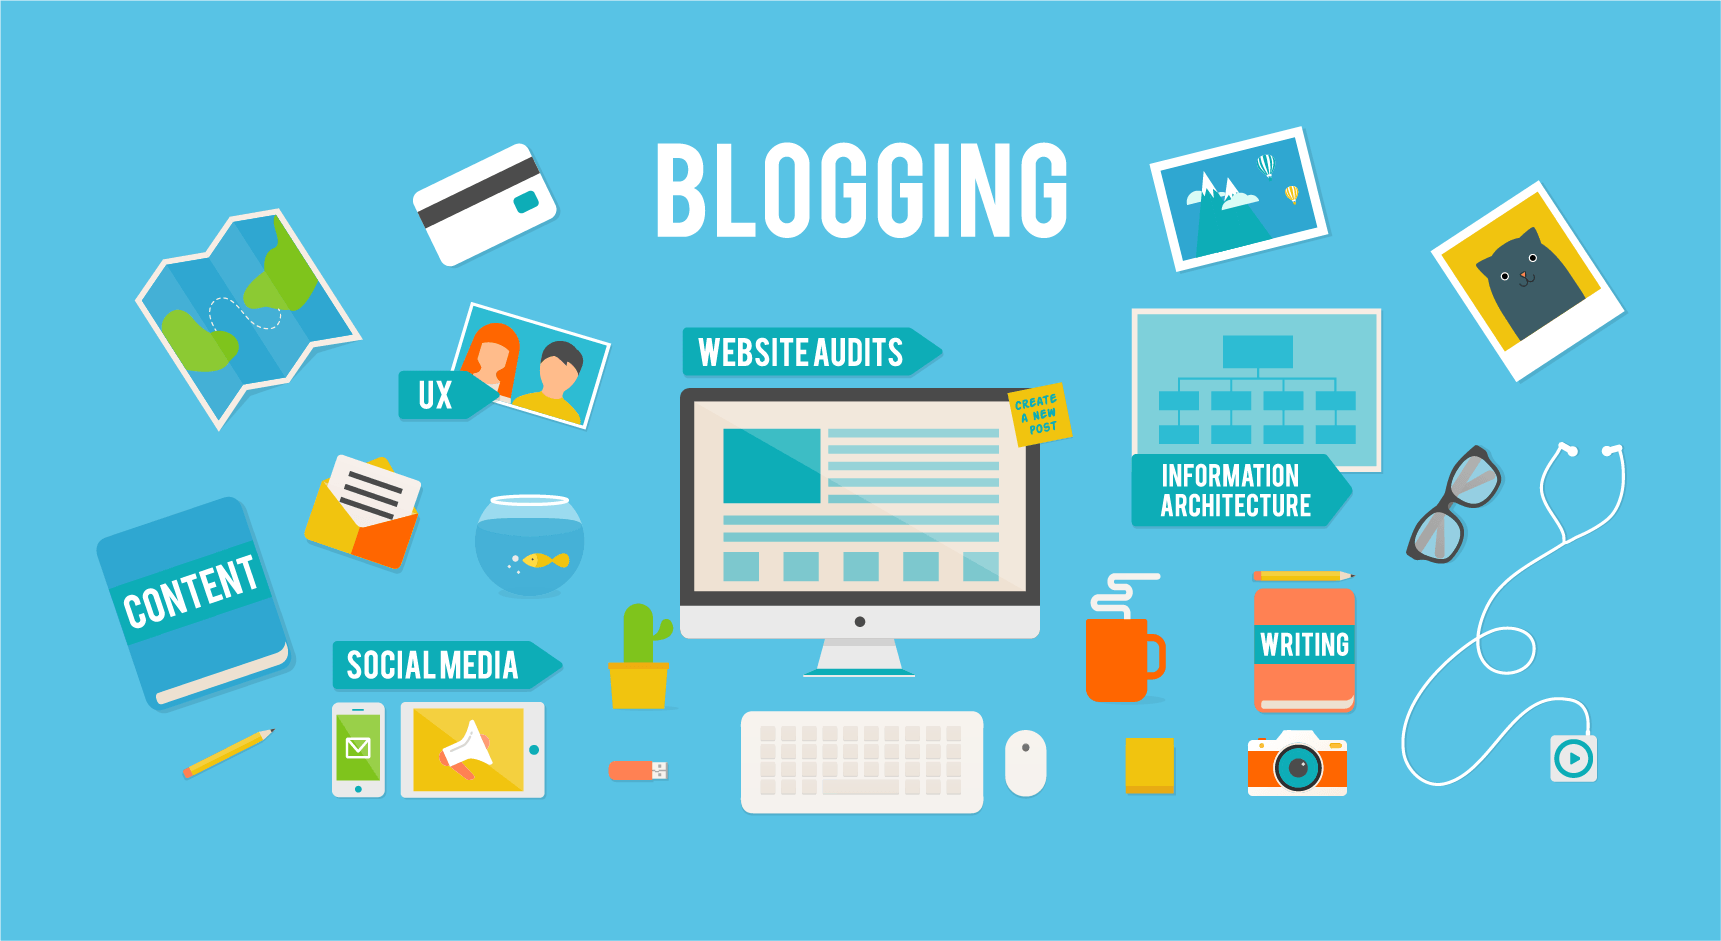 A Guide to Promoting Your Blog Posts